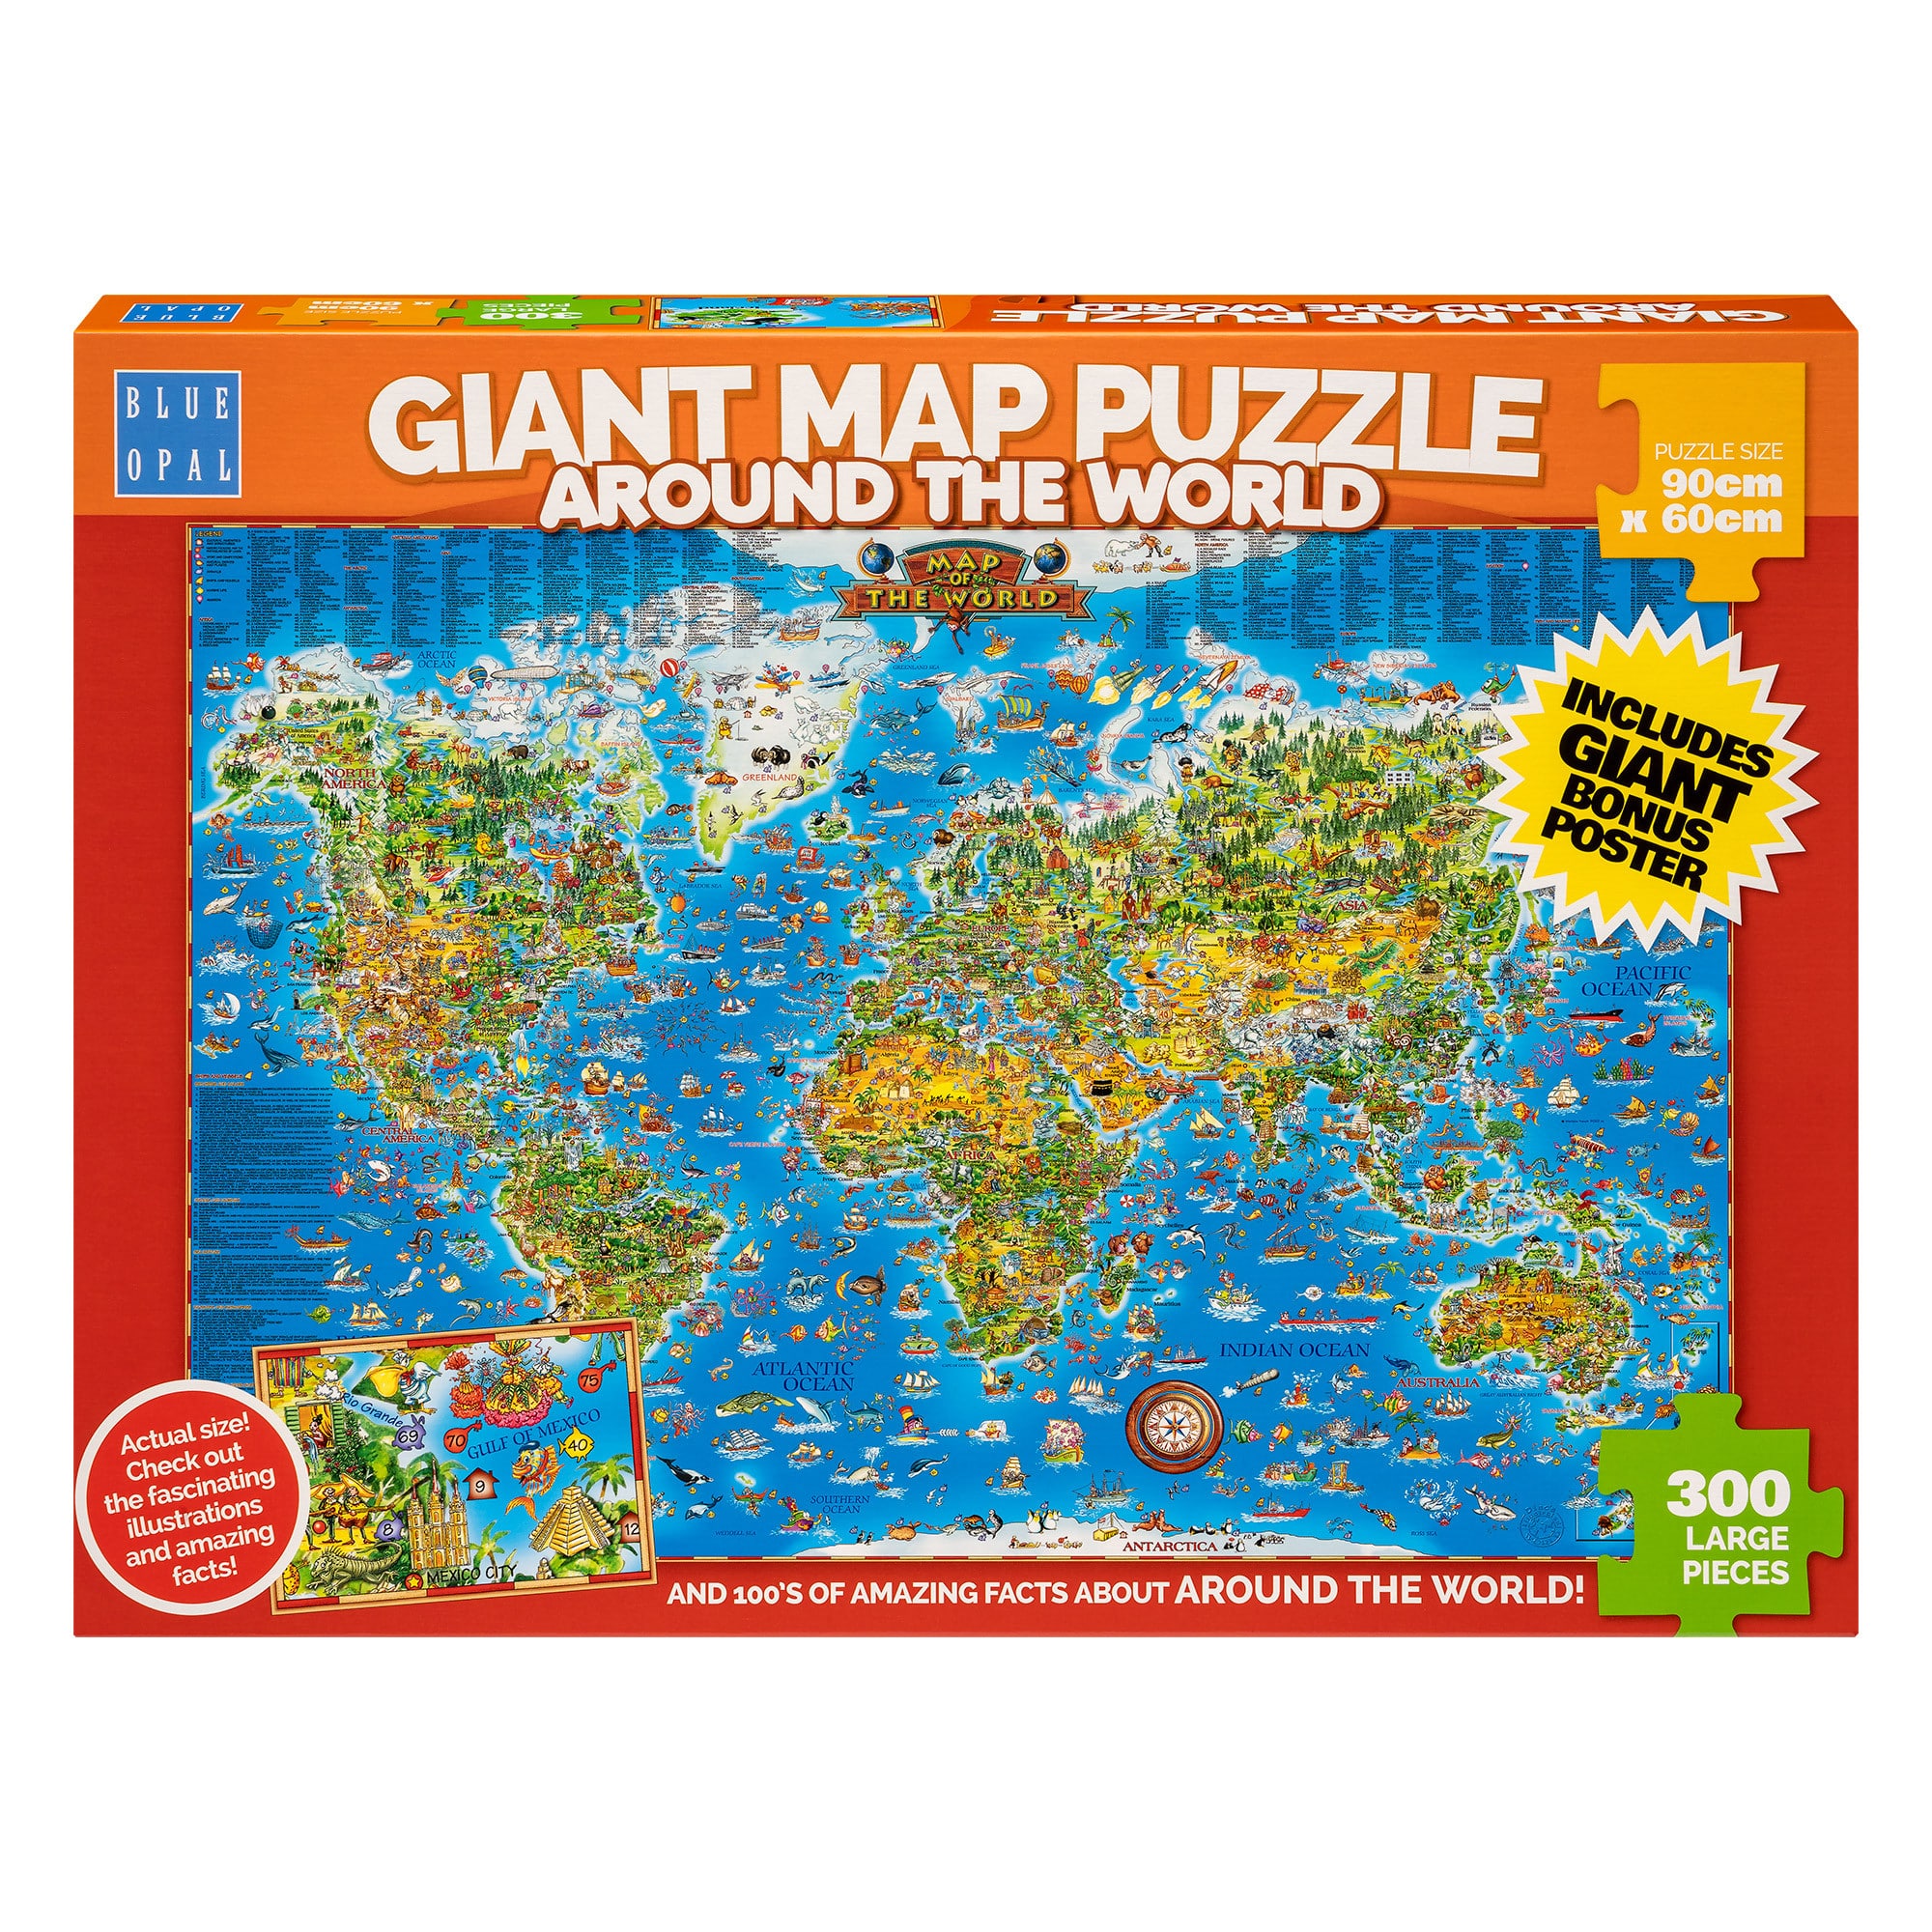 Giant Map Of The World - 300 Jigsaw Pieces